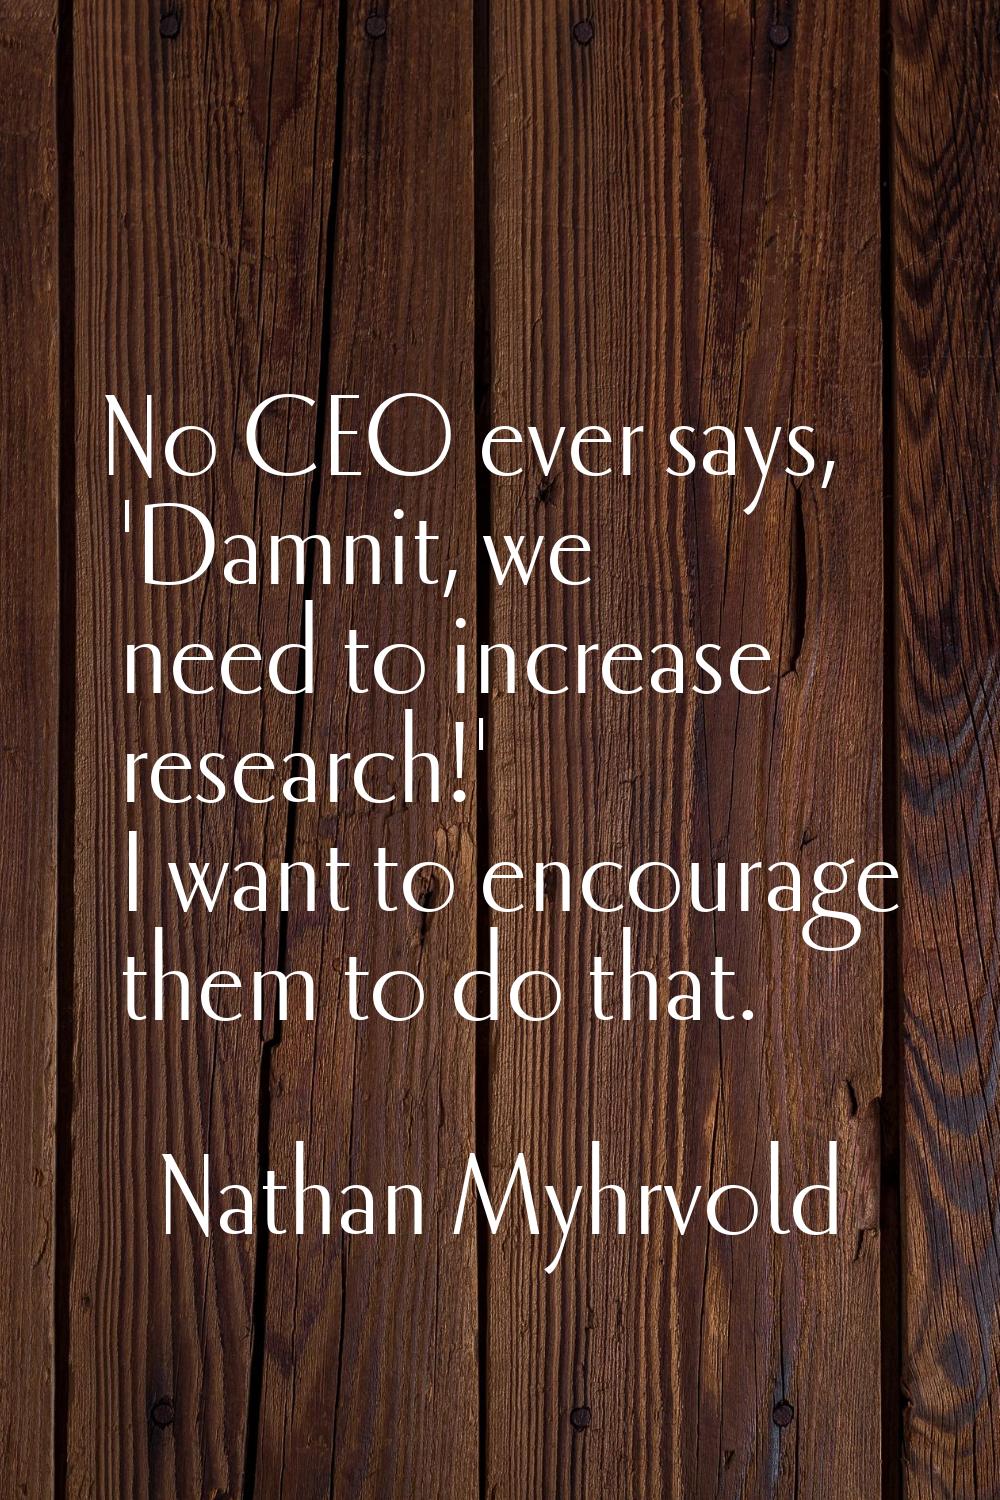 No CEO ever says, 'Damnit, we need to increase research!' I want to encourage them to do that.